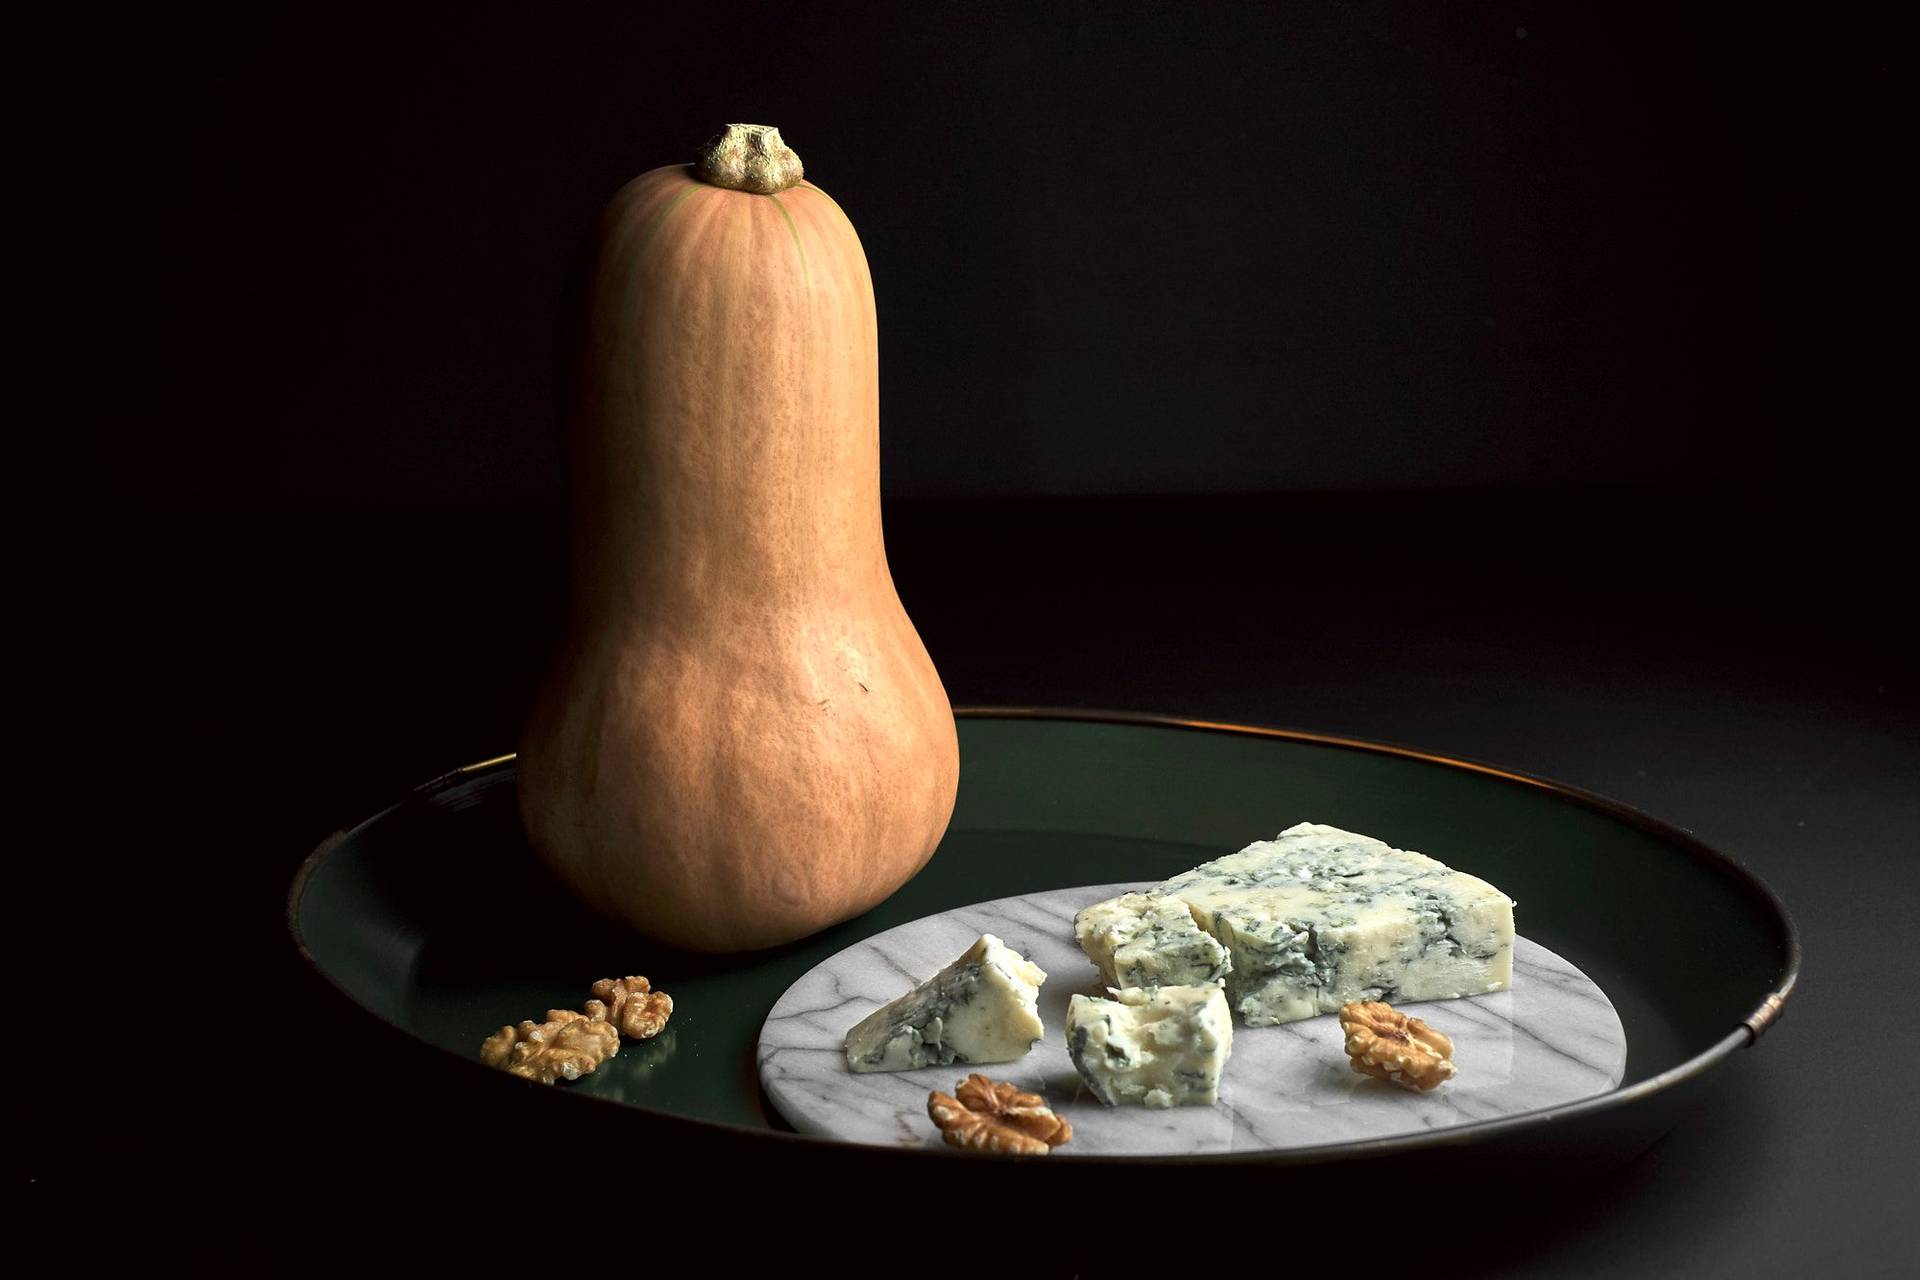 pumpkin, blue cheese and walnuts on a green plate with black background